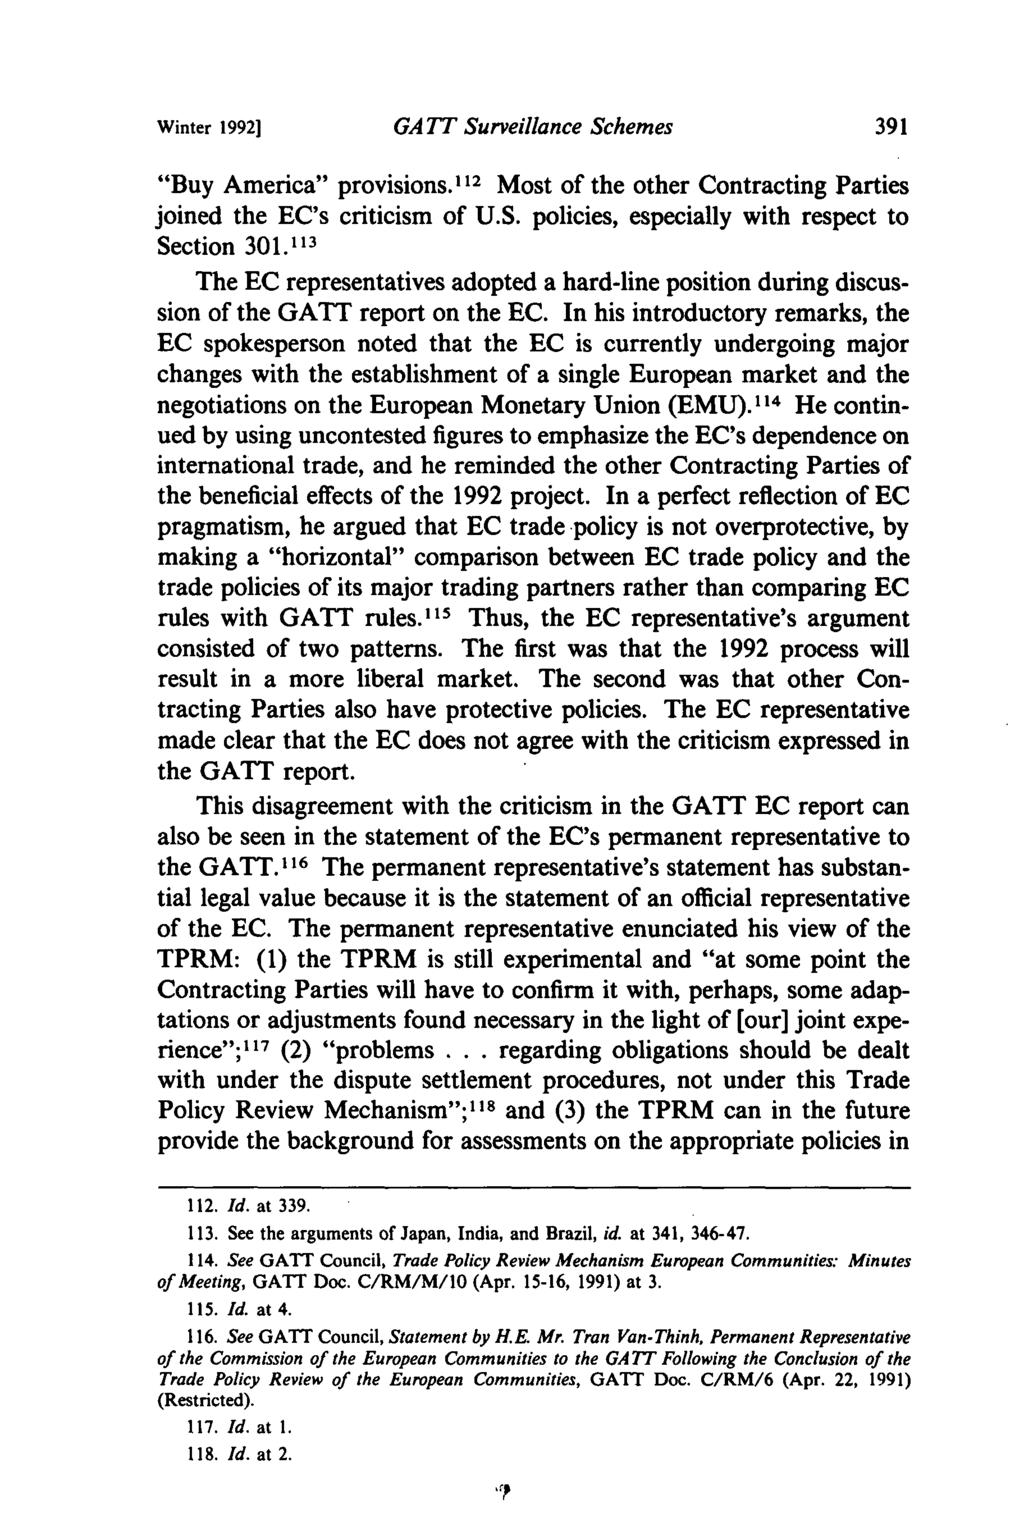 Winter 1992] GA TT Surveillance Schemes "Buy America" provisions.' 1 2 Most of the other Contracting Parties joined the EC's criticism of U.S. policies, especially with respect to Section 301.